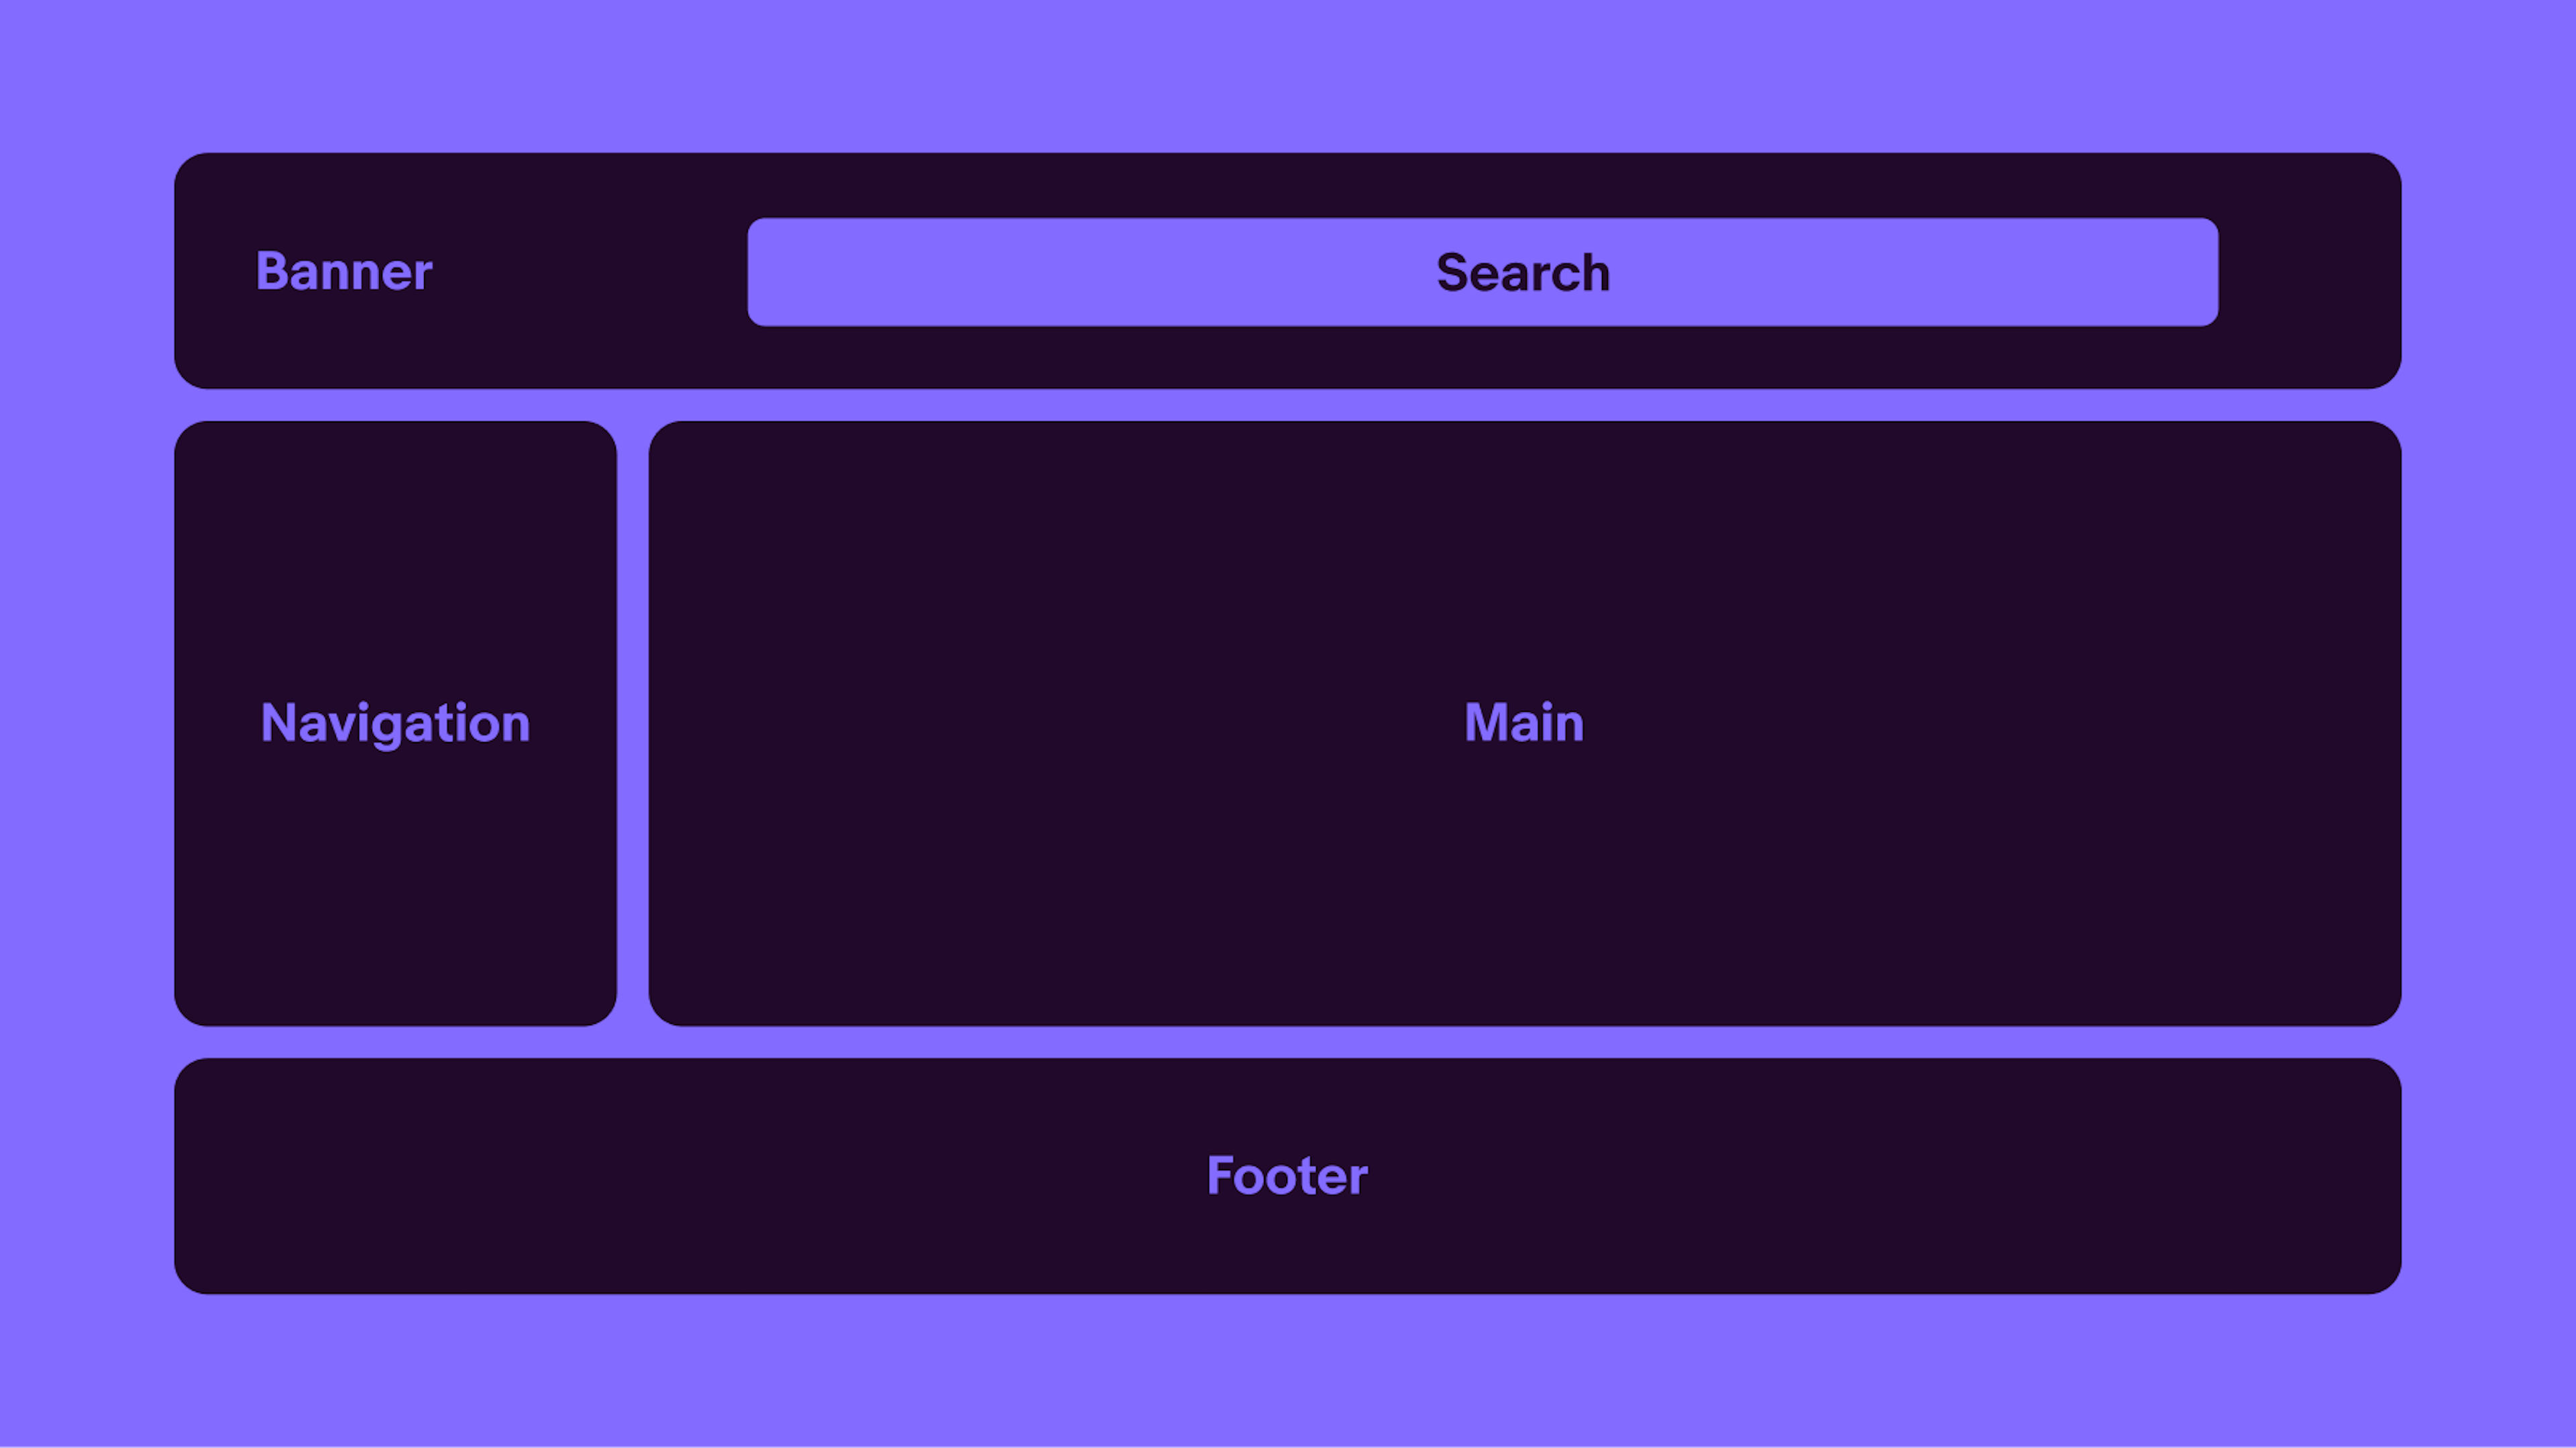 Wireframe that outlines the page layout. At the top, there's a header featuring a search bar, complemented by a navigation menu on the left. The main content is prominently displayed on the right side. A footer extends across the bottom of all content.